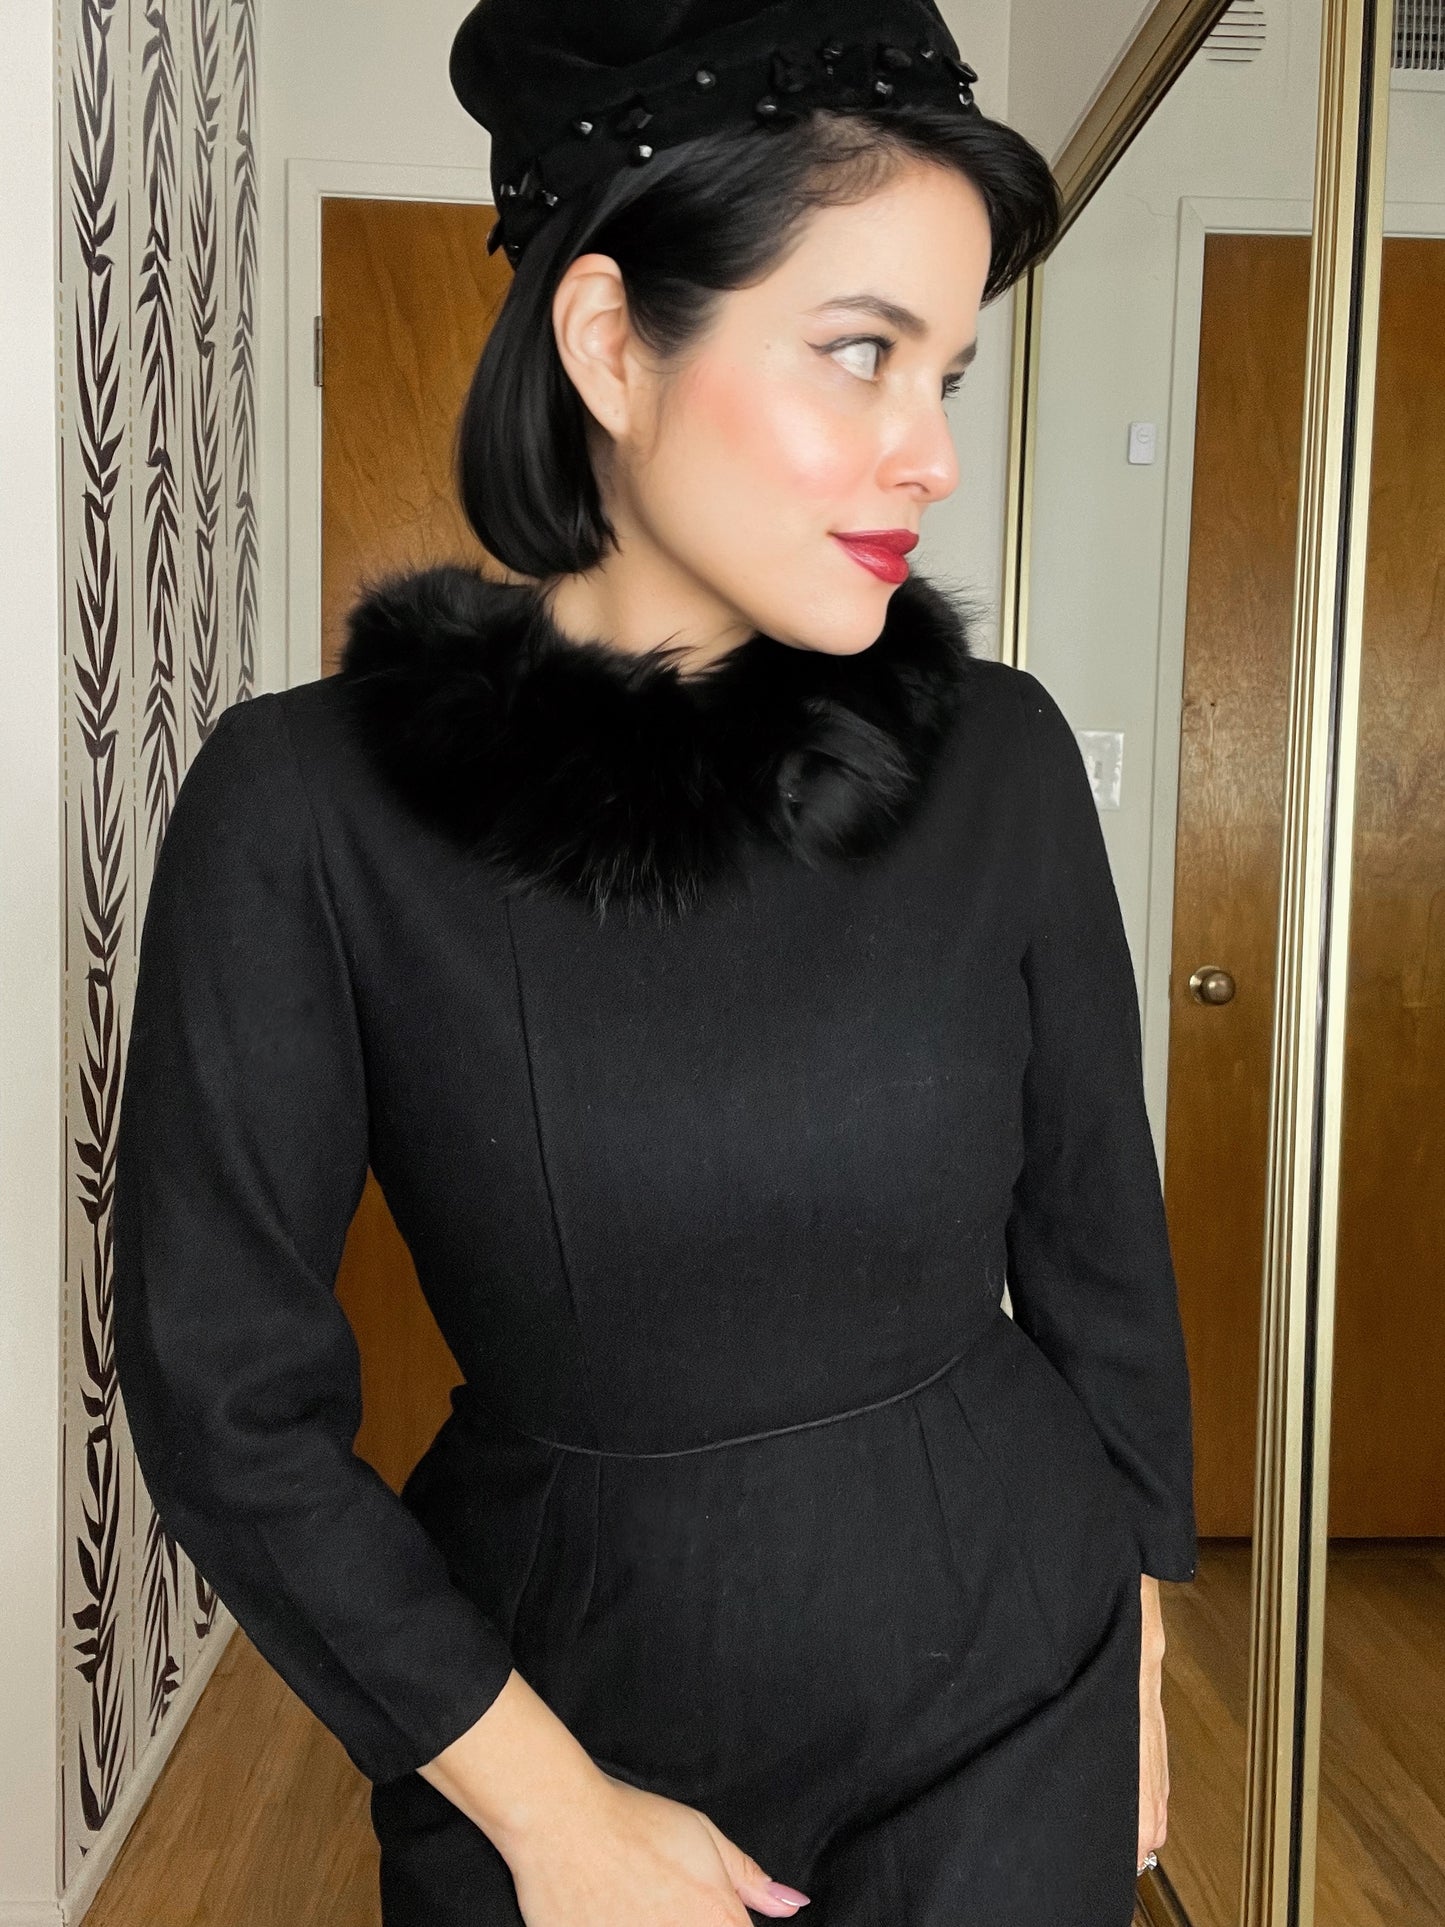 Vintage 50s 60s Black 3/4 Sleeve Dress with Animal Hair Collar Best Fits Sizes XXS-S